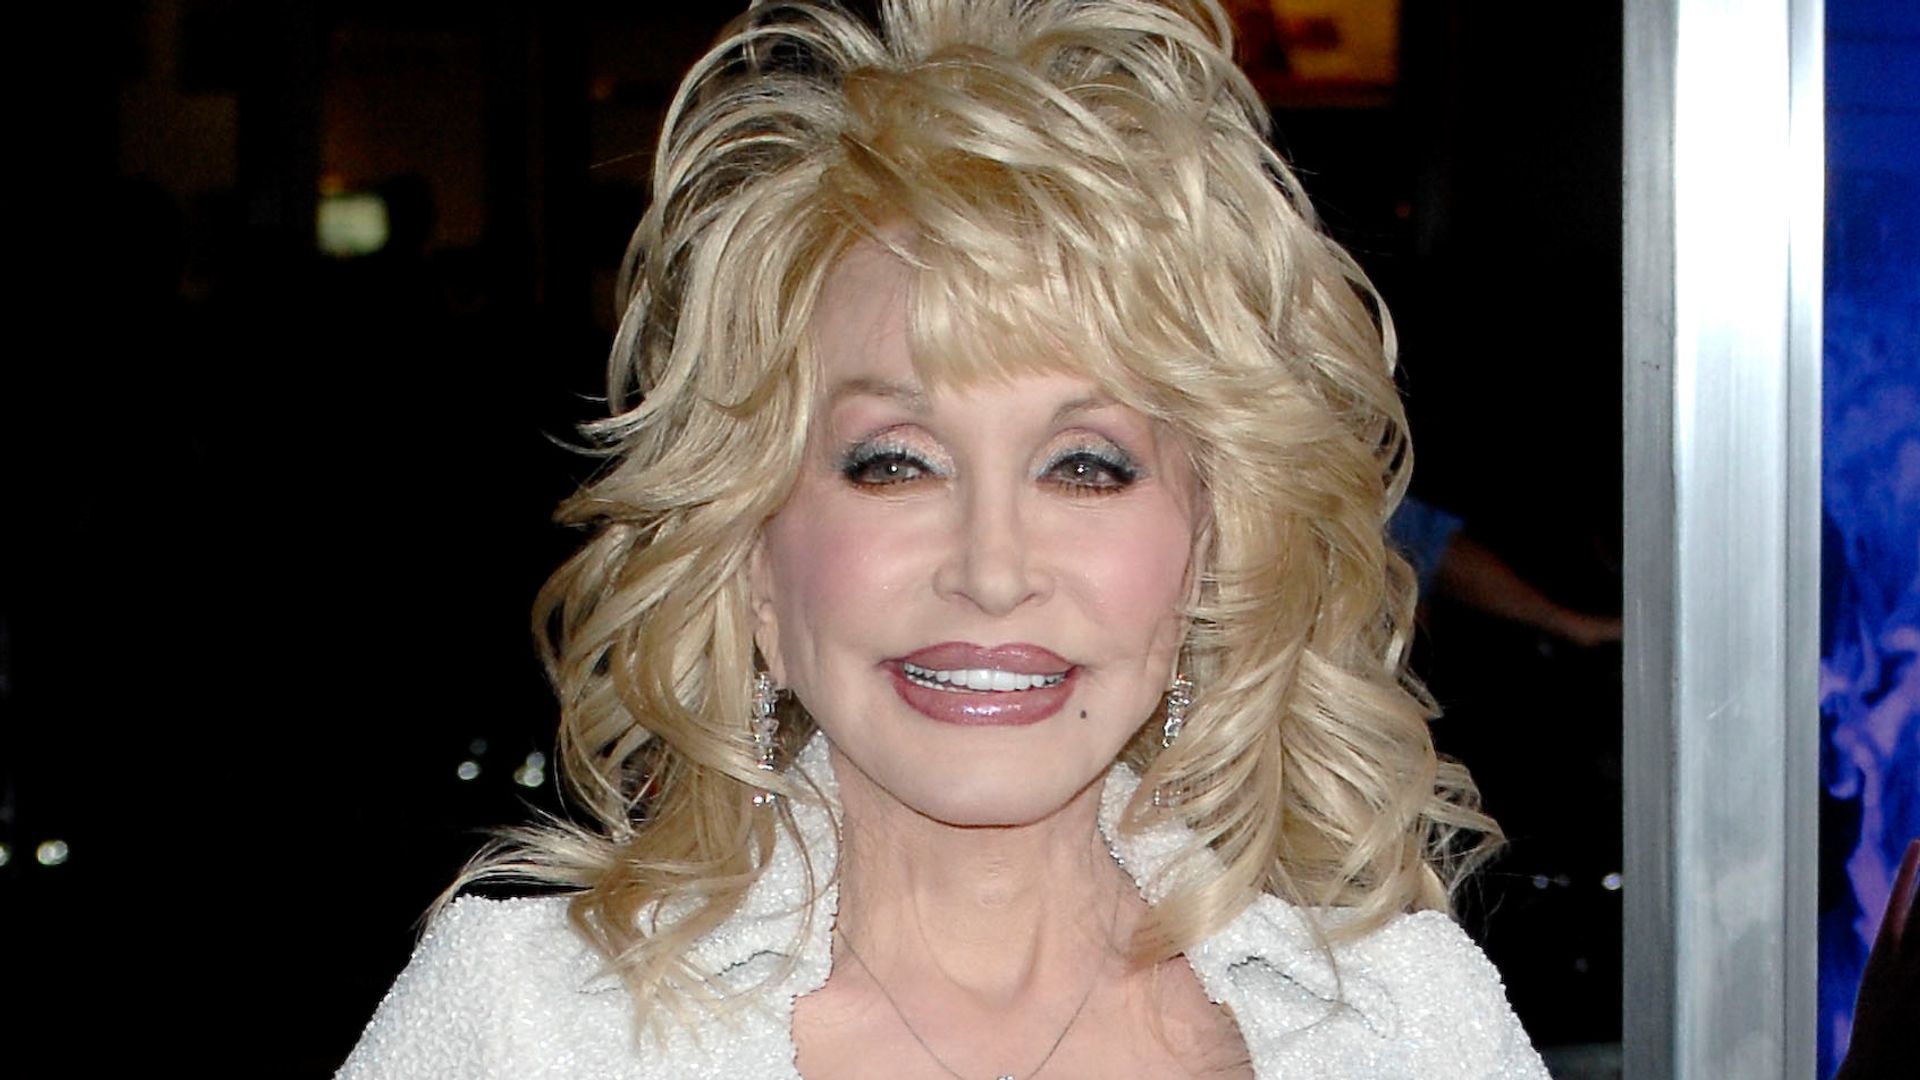 Dolly Parton in a white dress